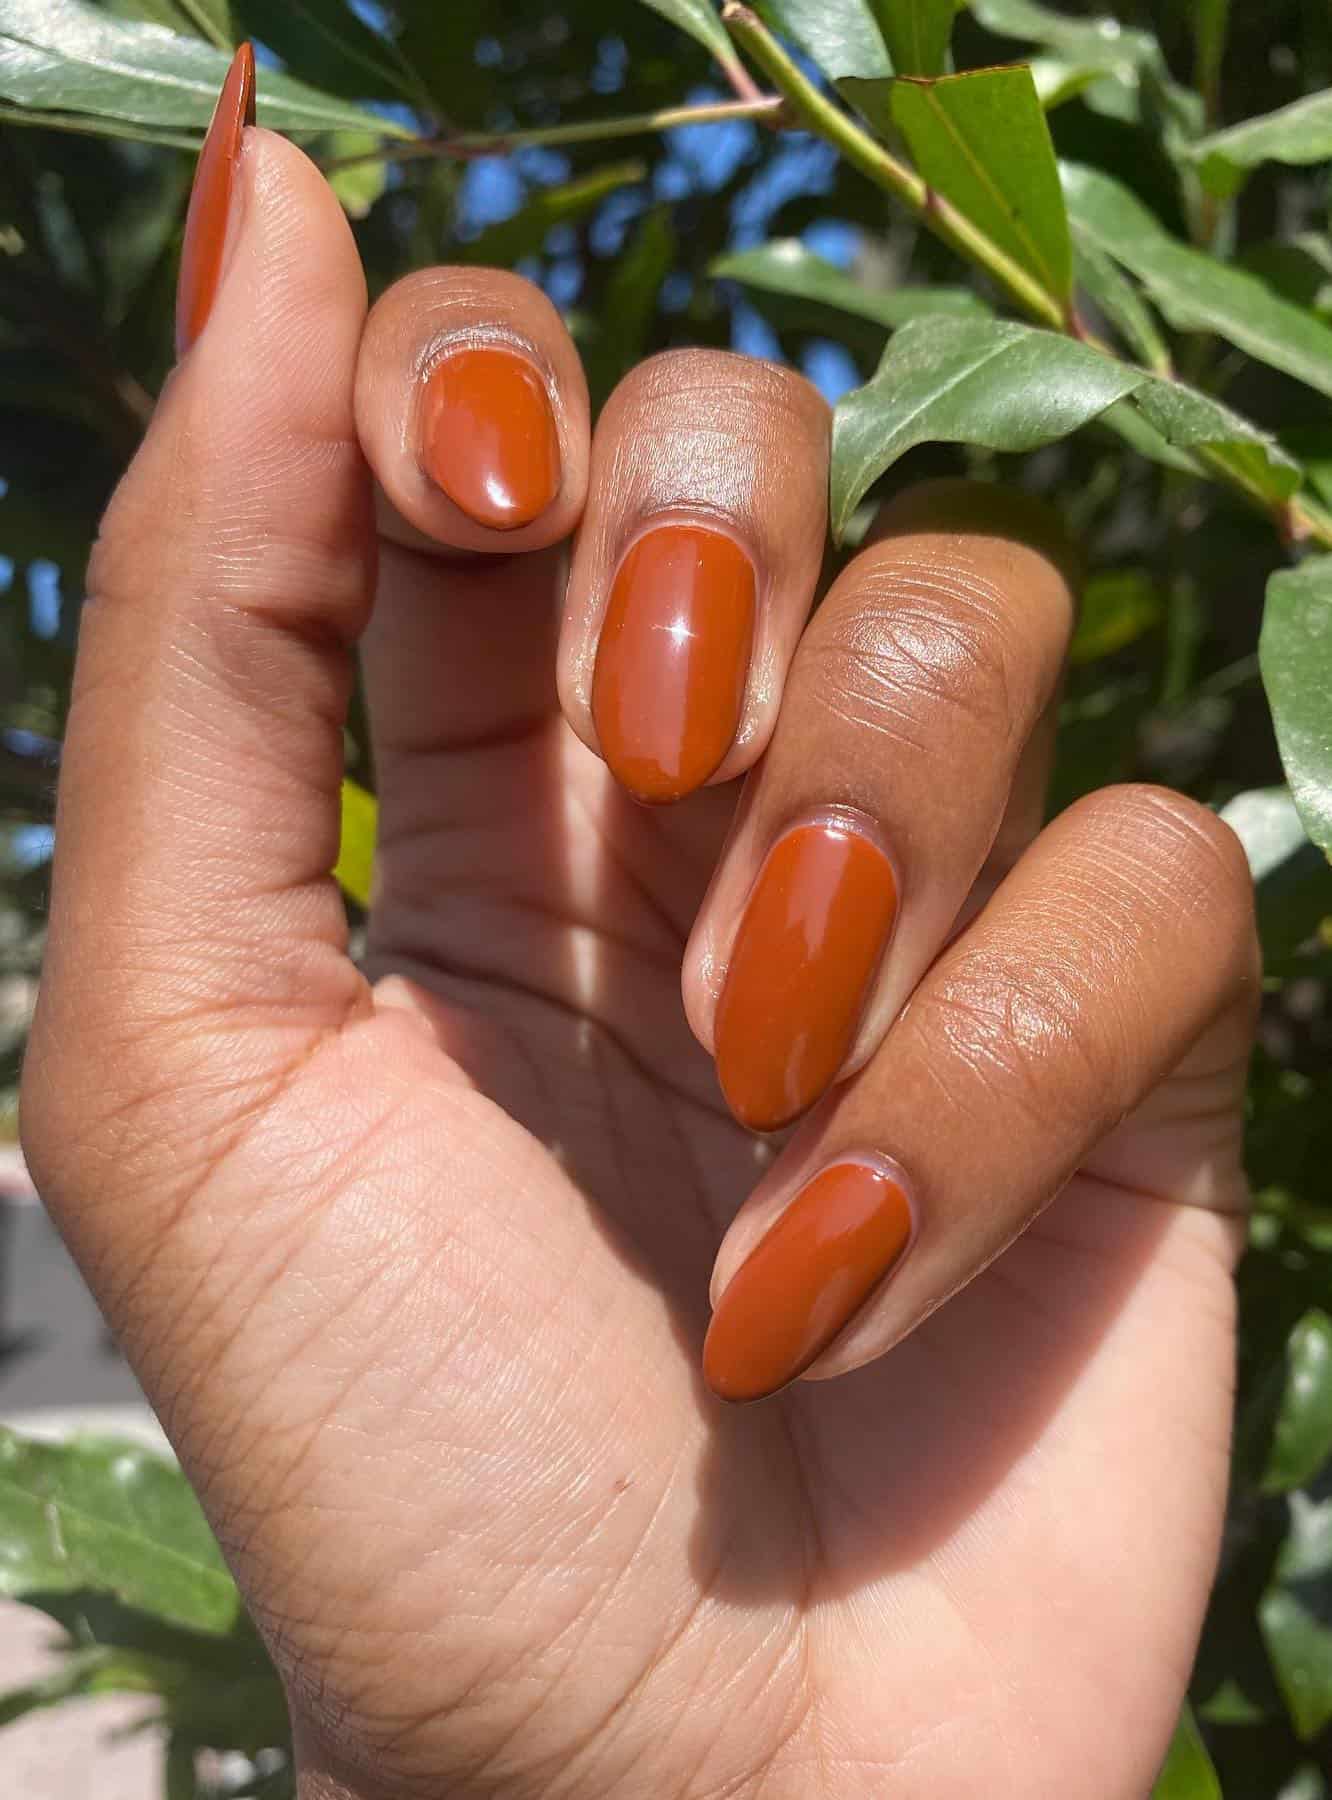 a hand with medium round nails painted with a burnt orange polish and gloss finish